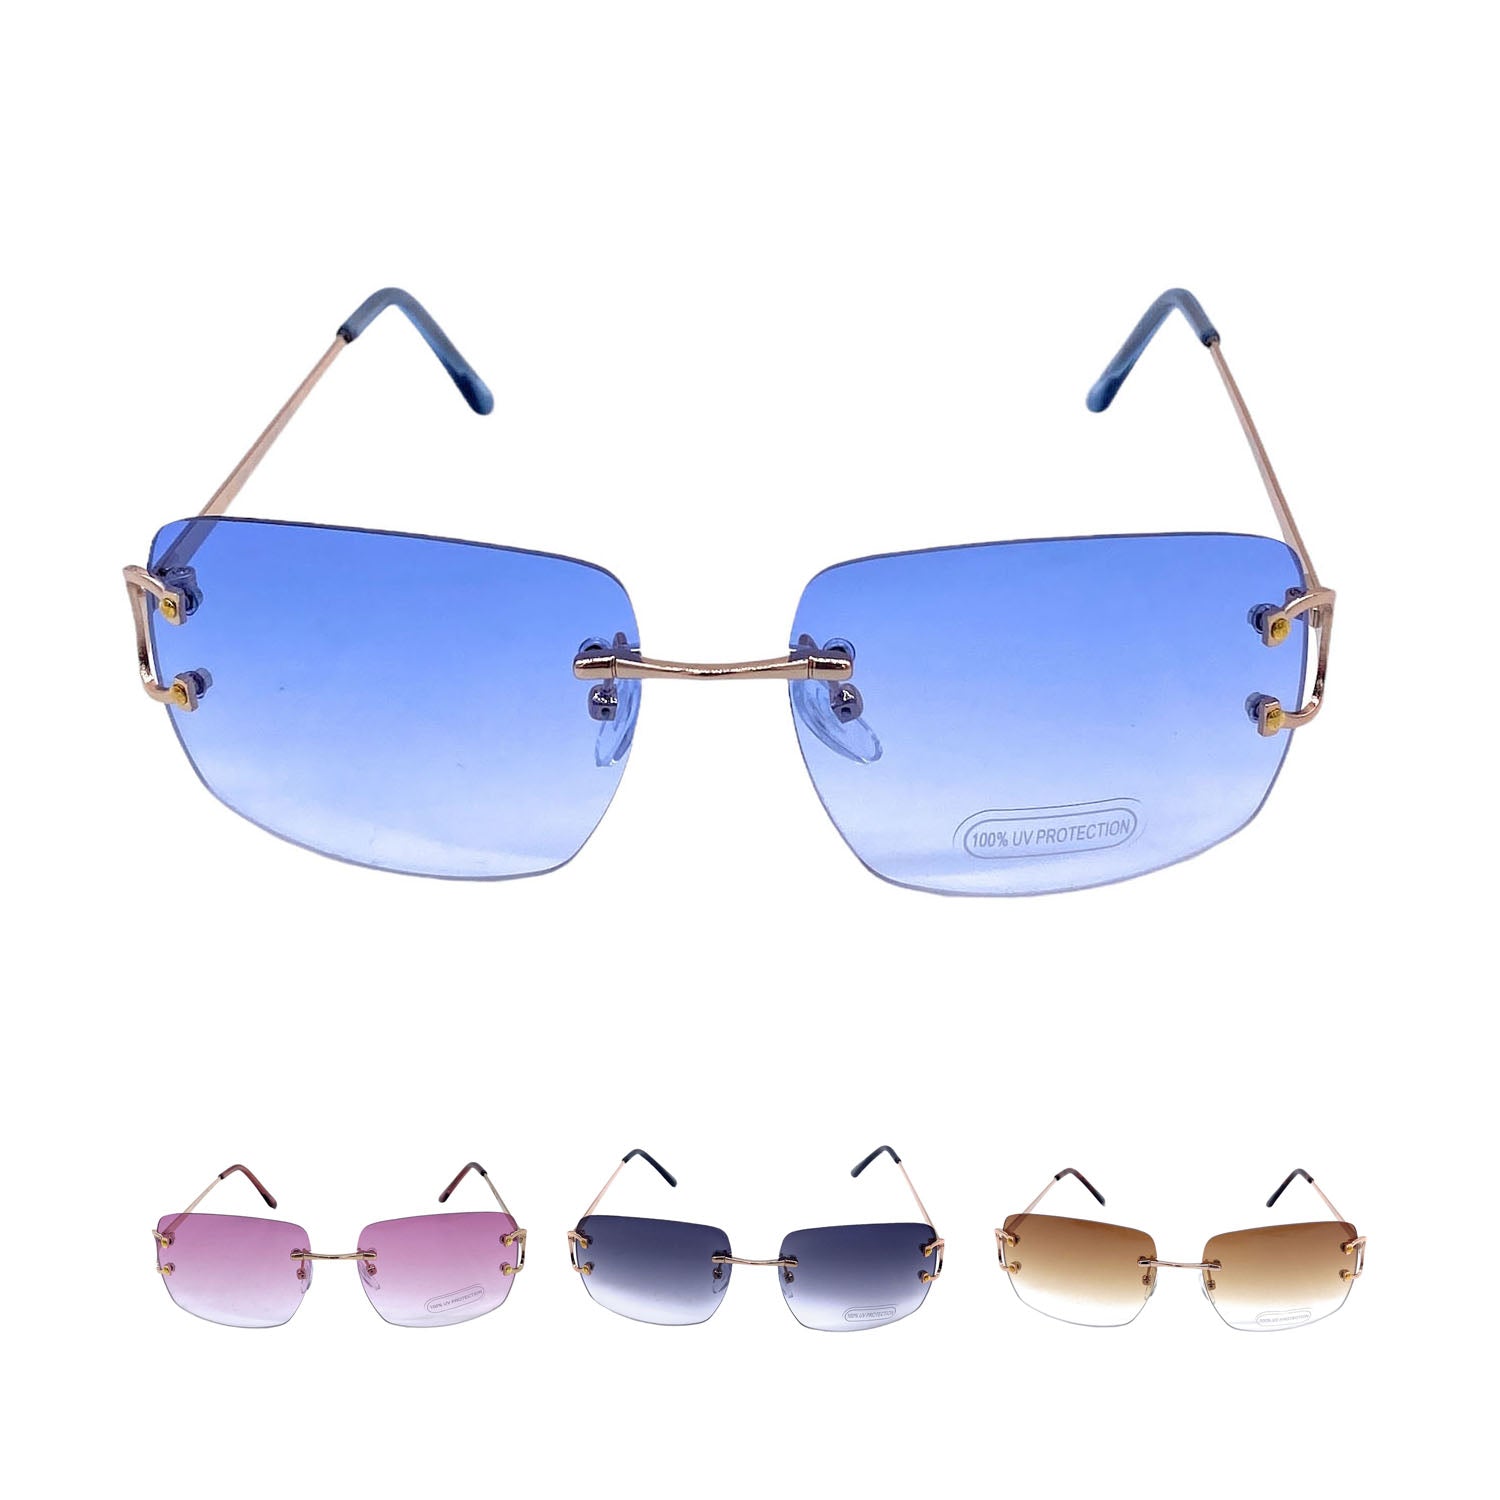 1pair Men's Fashionable Square Frame Sunglasses With Uv Protection